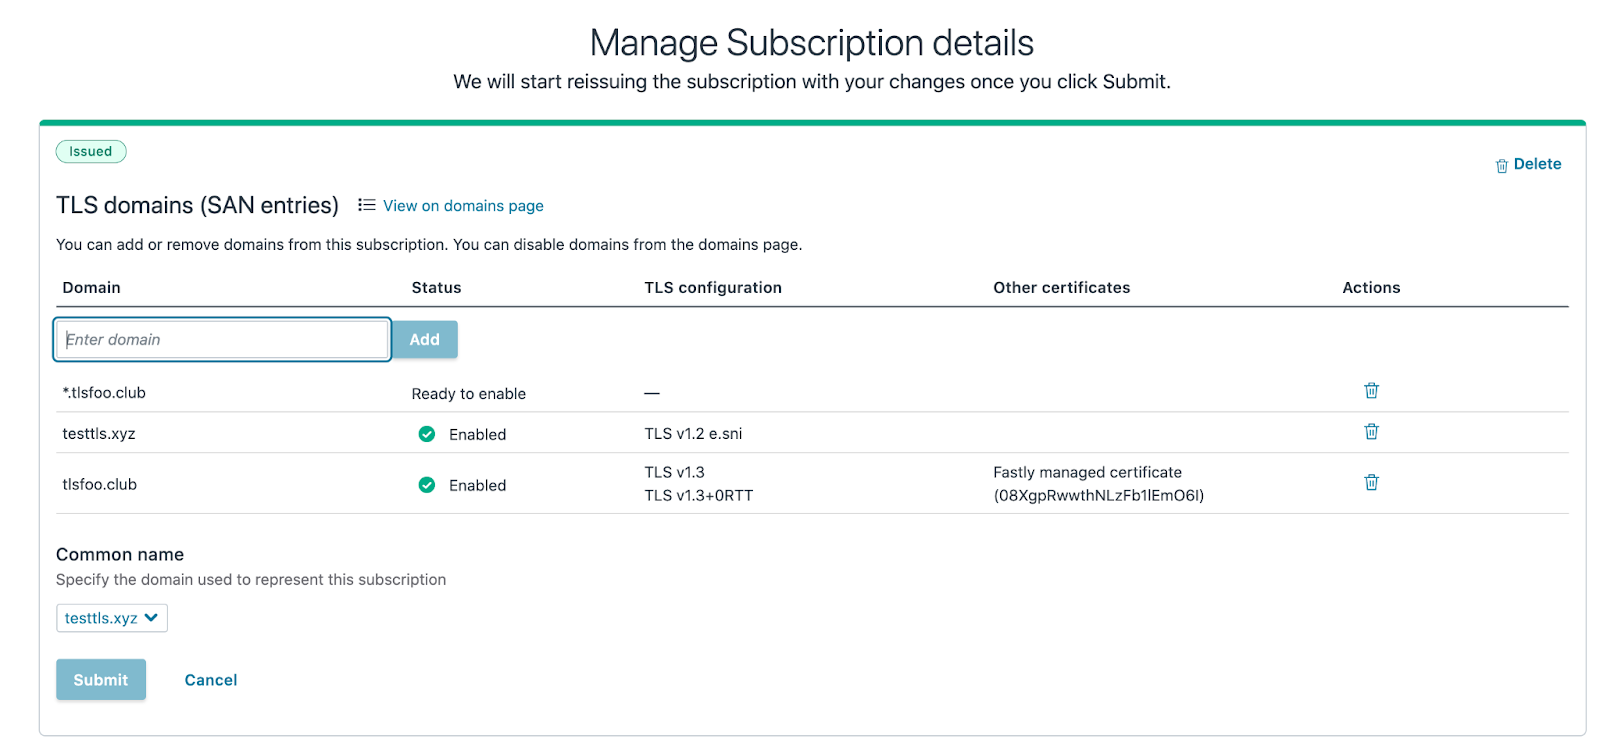 the manage subscription details page